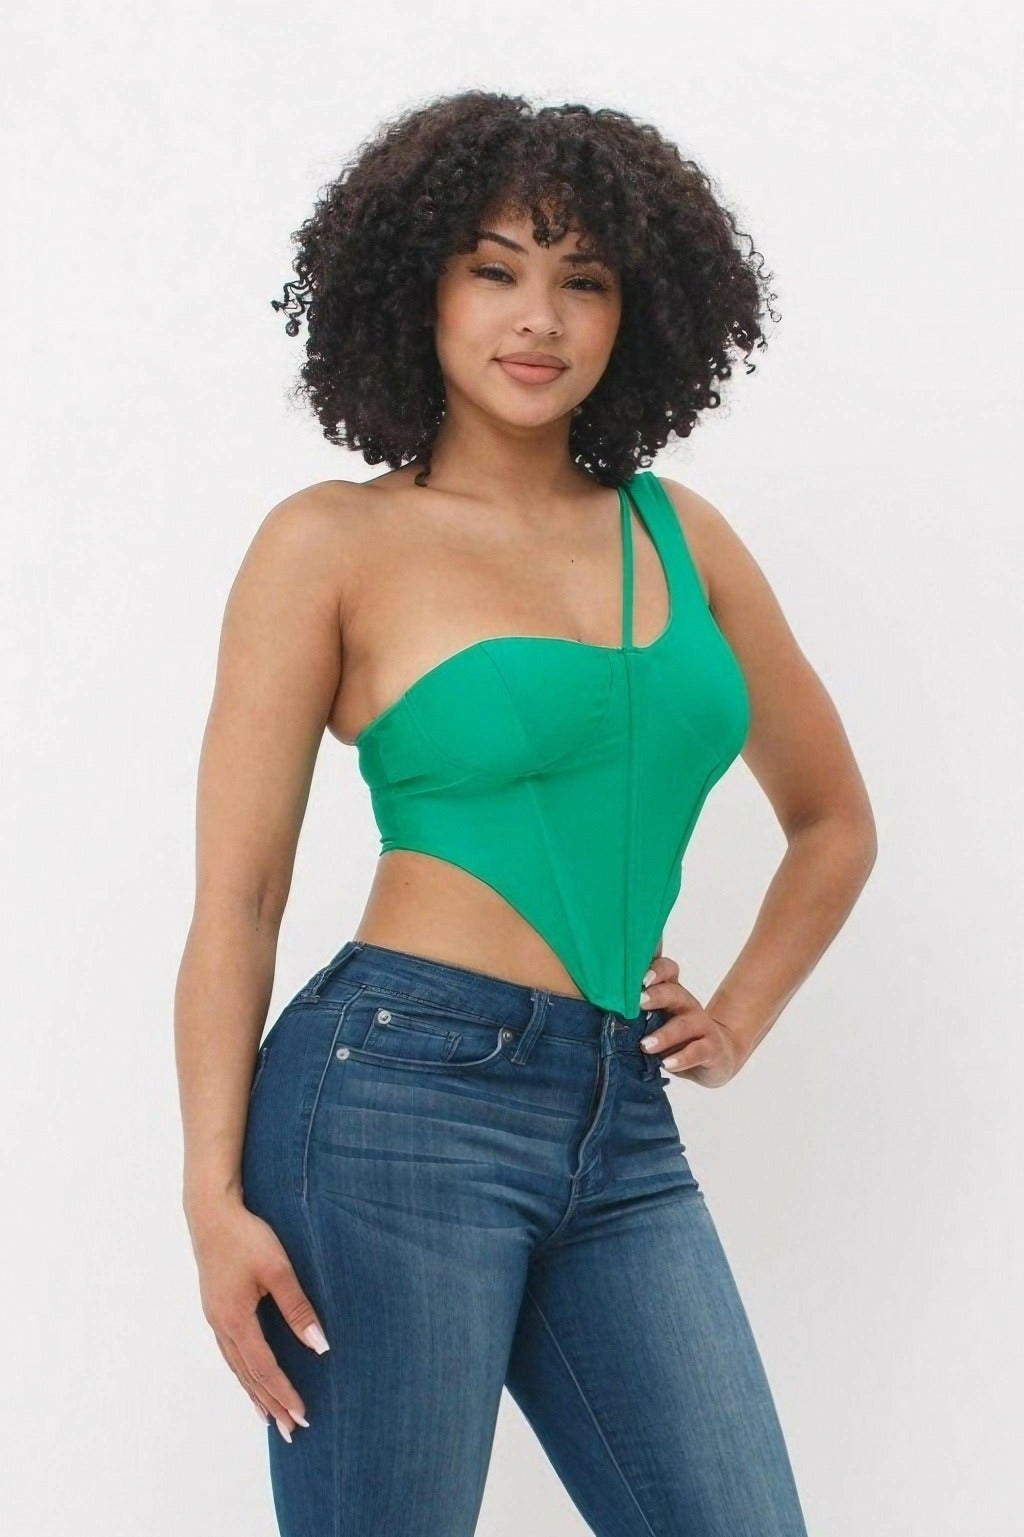 Epicplacess tops S / GREEN Bodice Corset Style One Shoulder Tops A6452